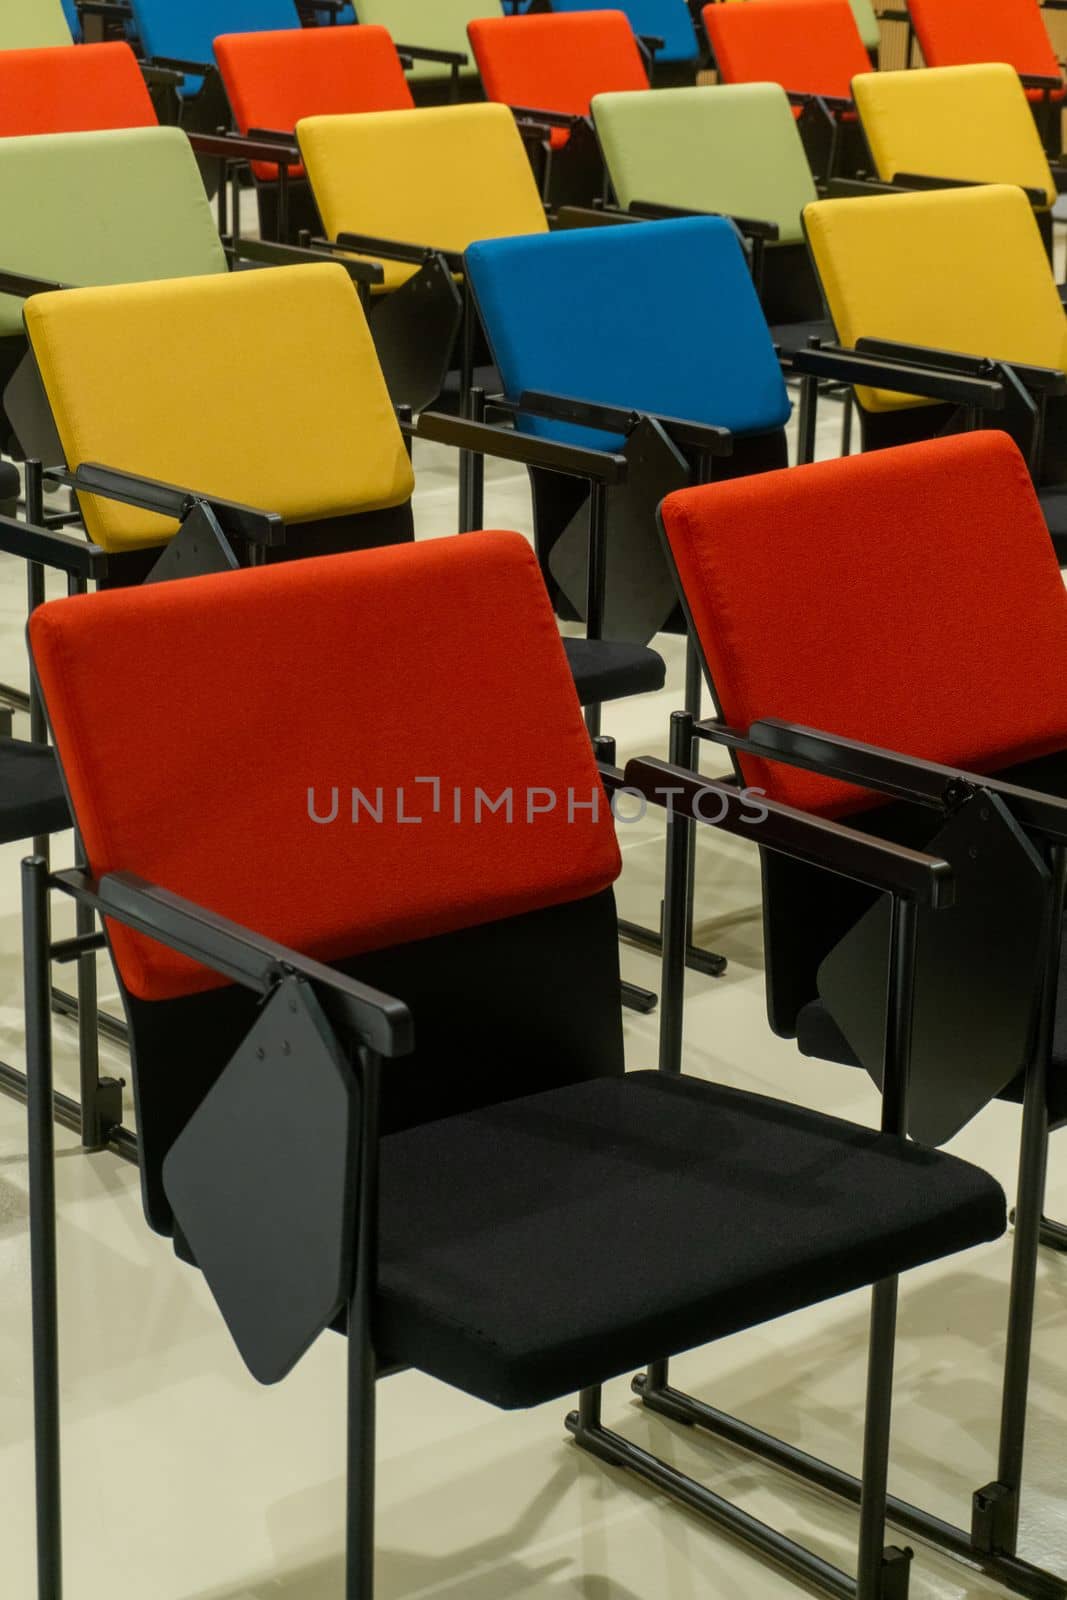 Rows of colourful seats in the hall background